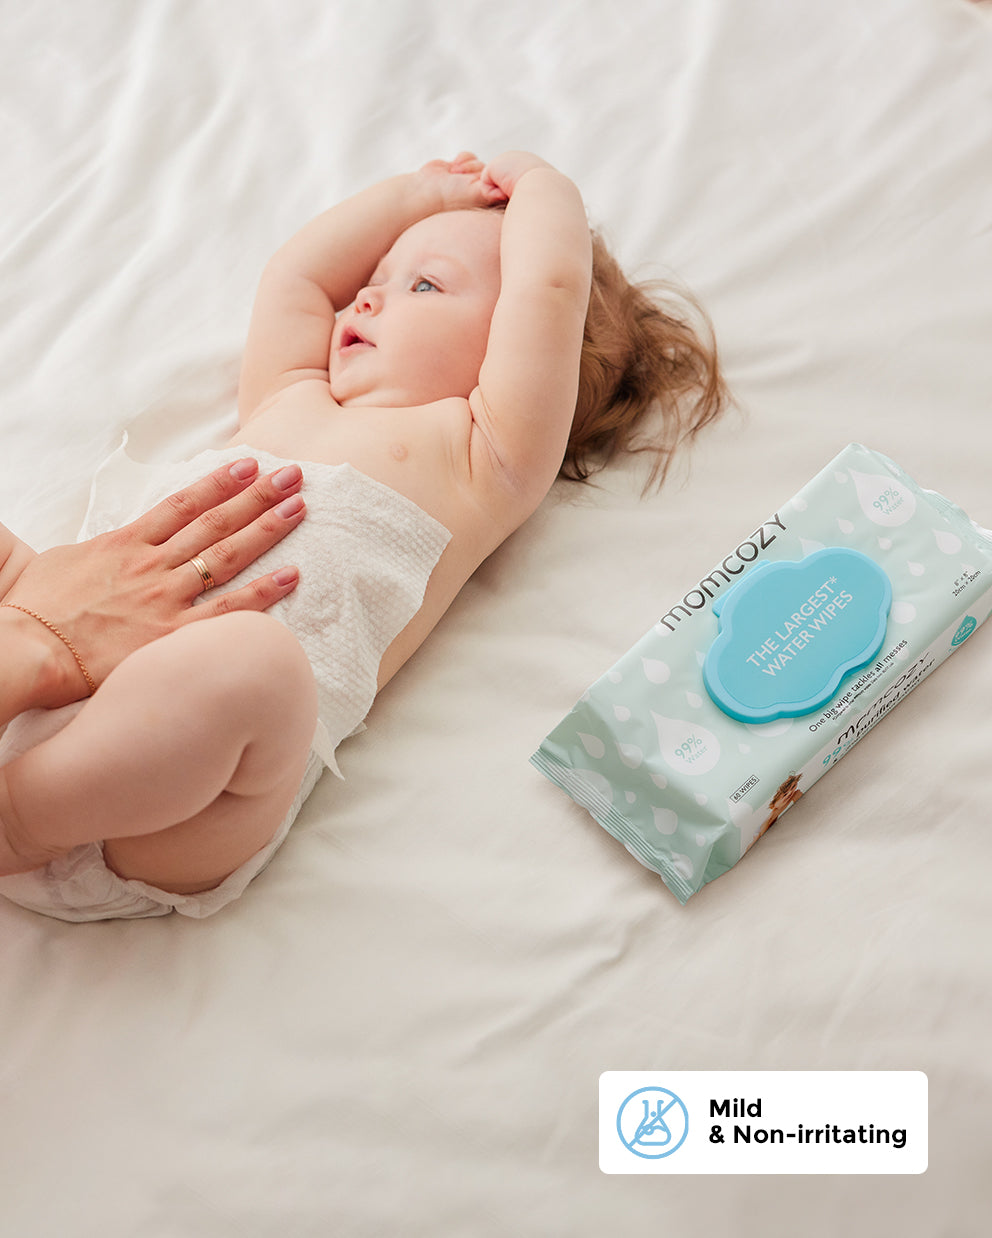 Momcozy Water Wipes - Higher Level of Purity